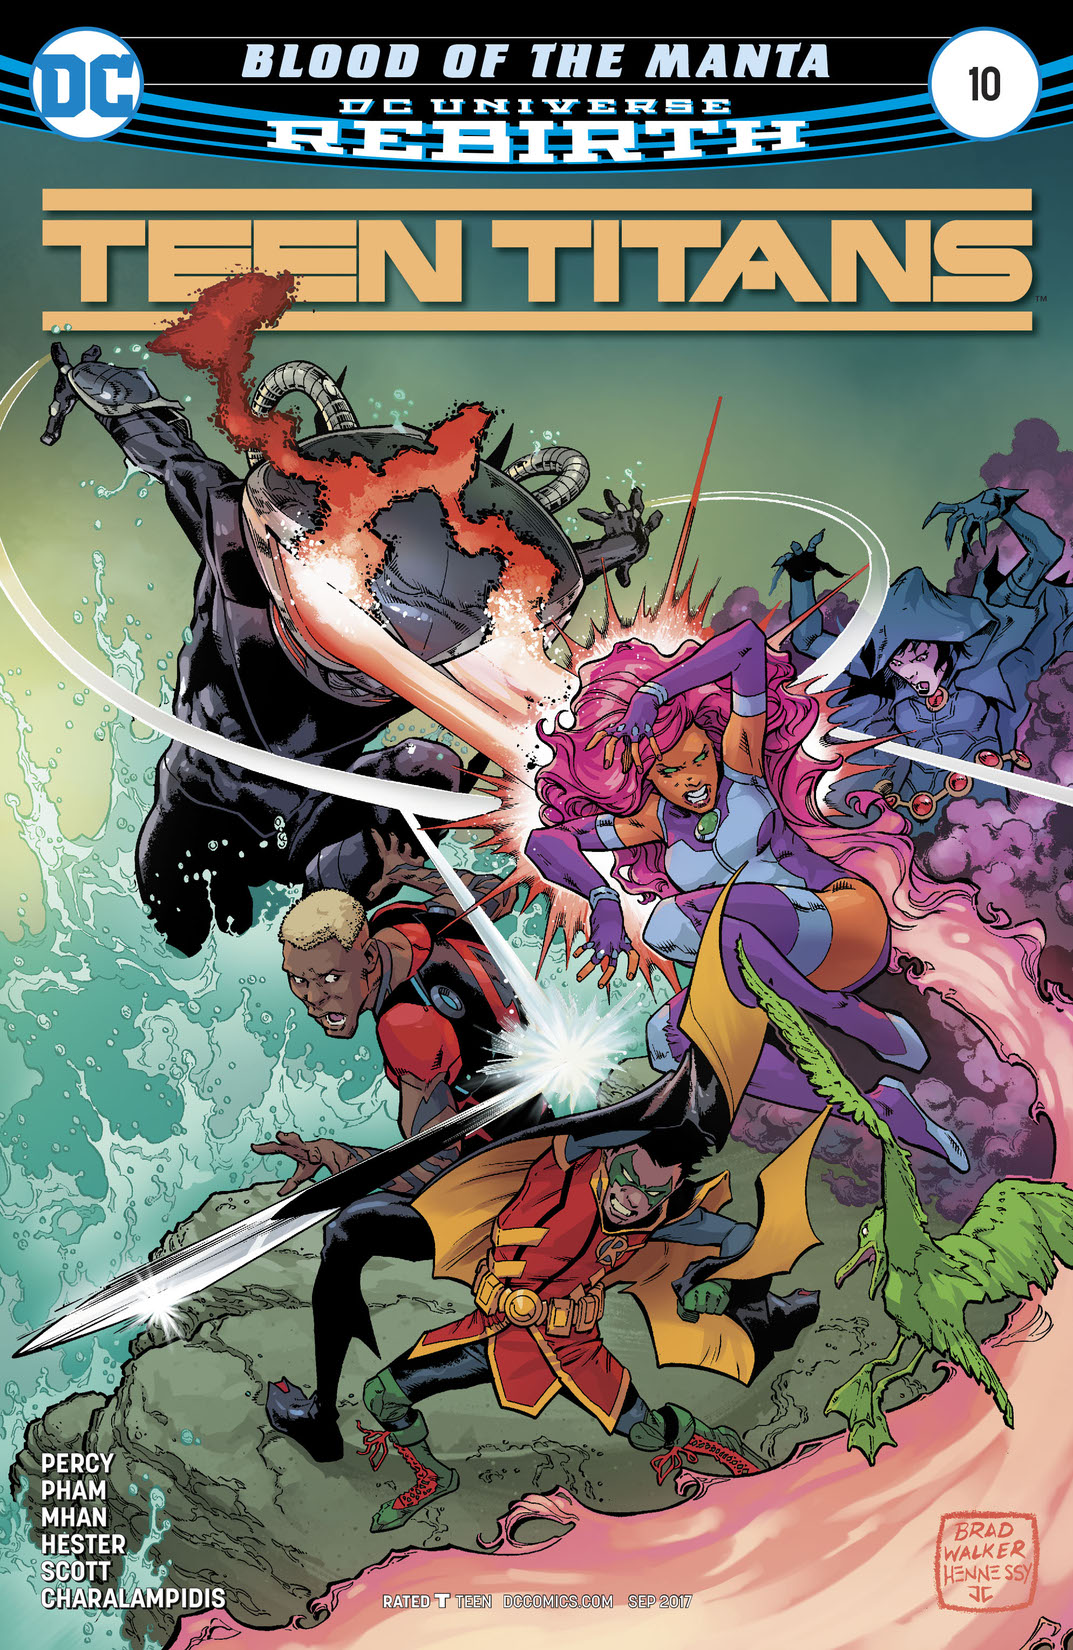 Teen Titans (2016-) #10 preview images